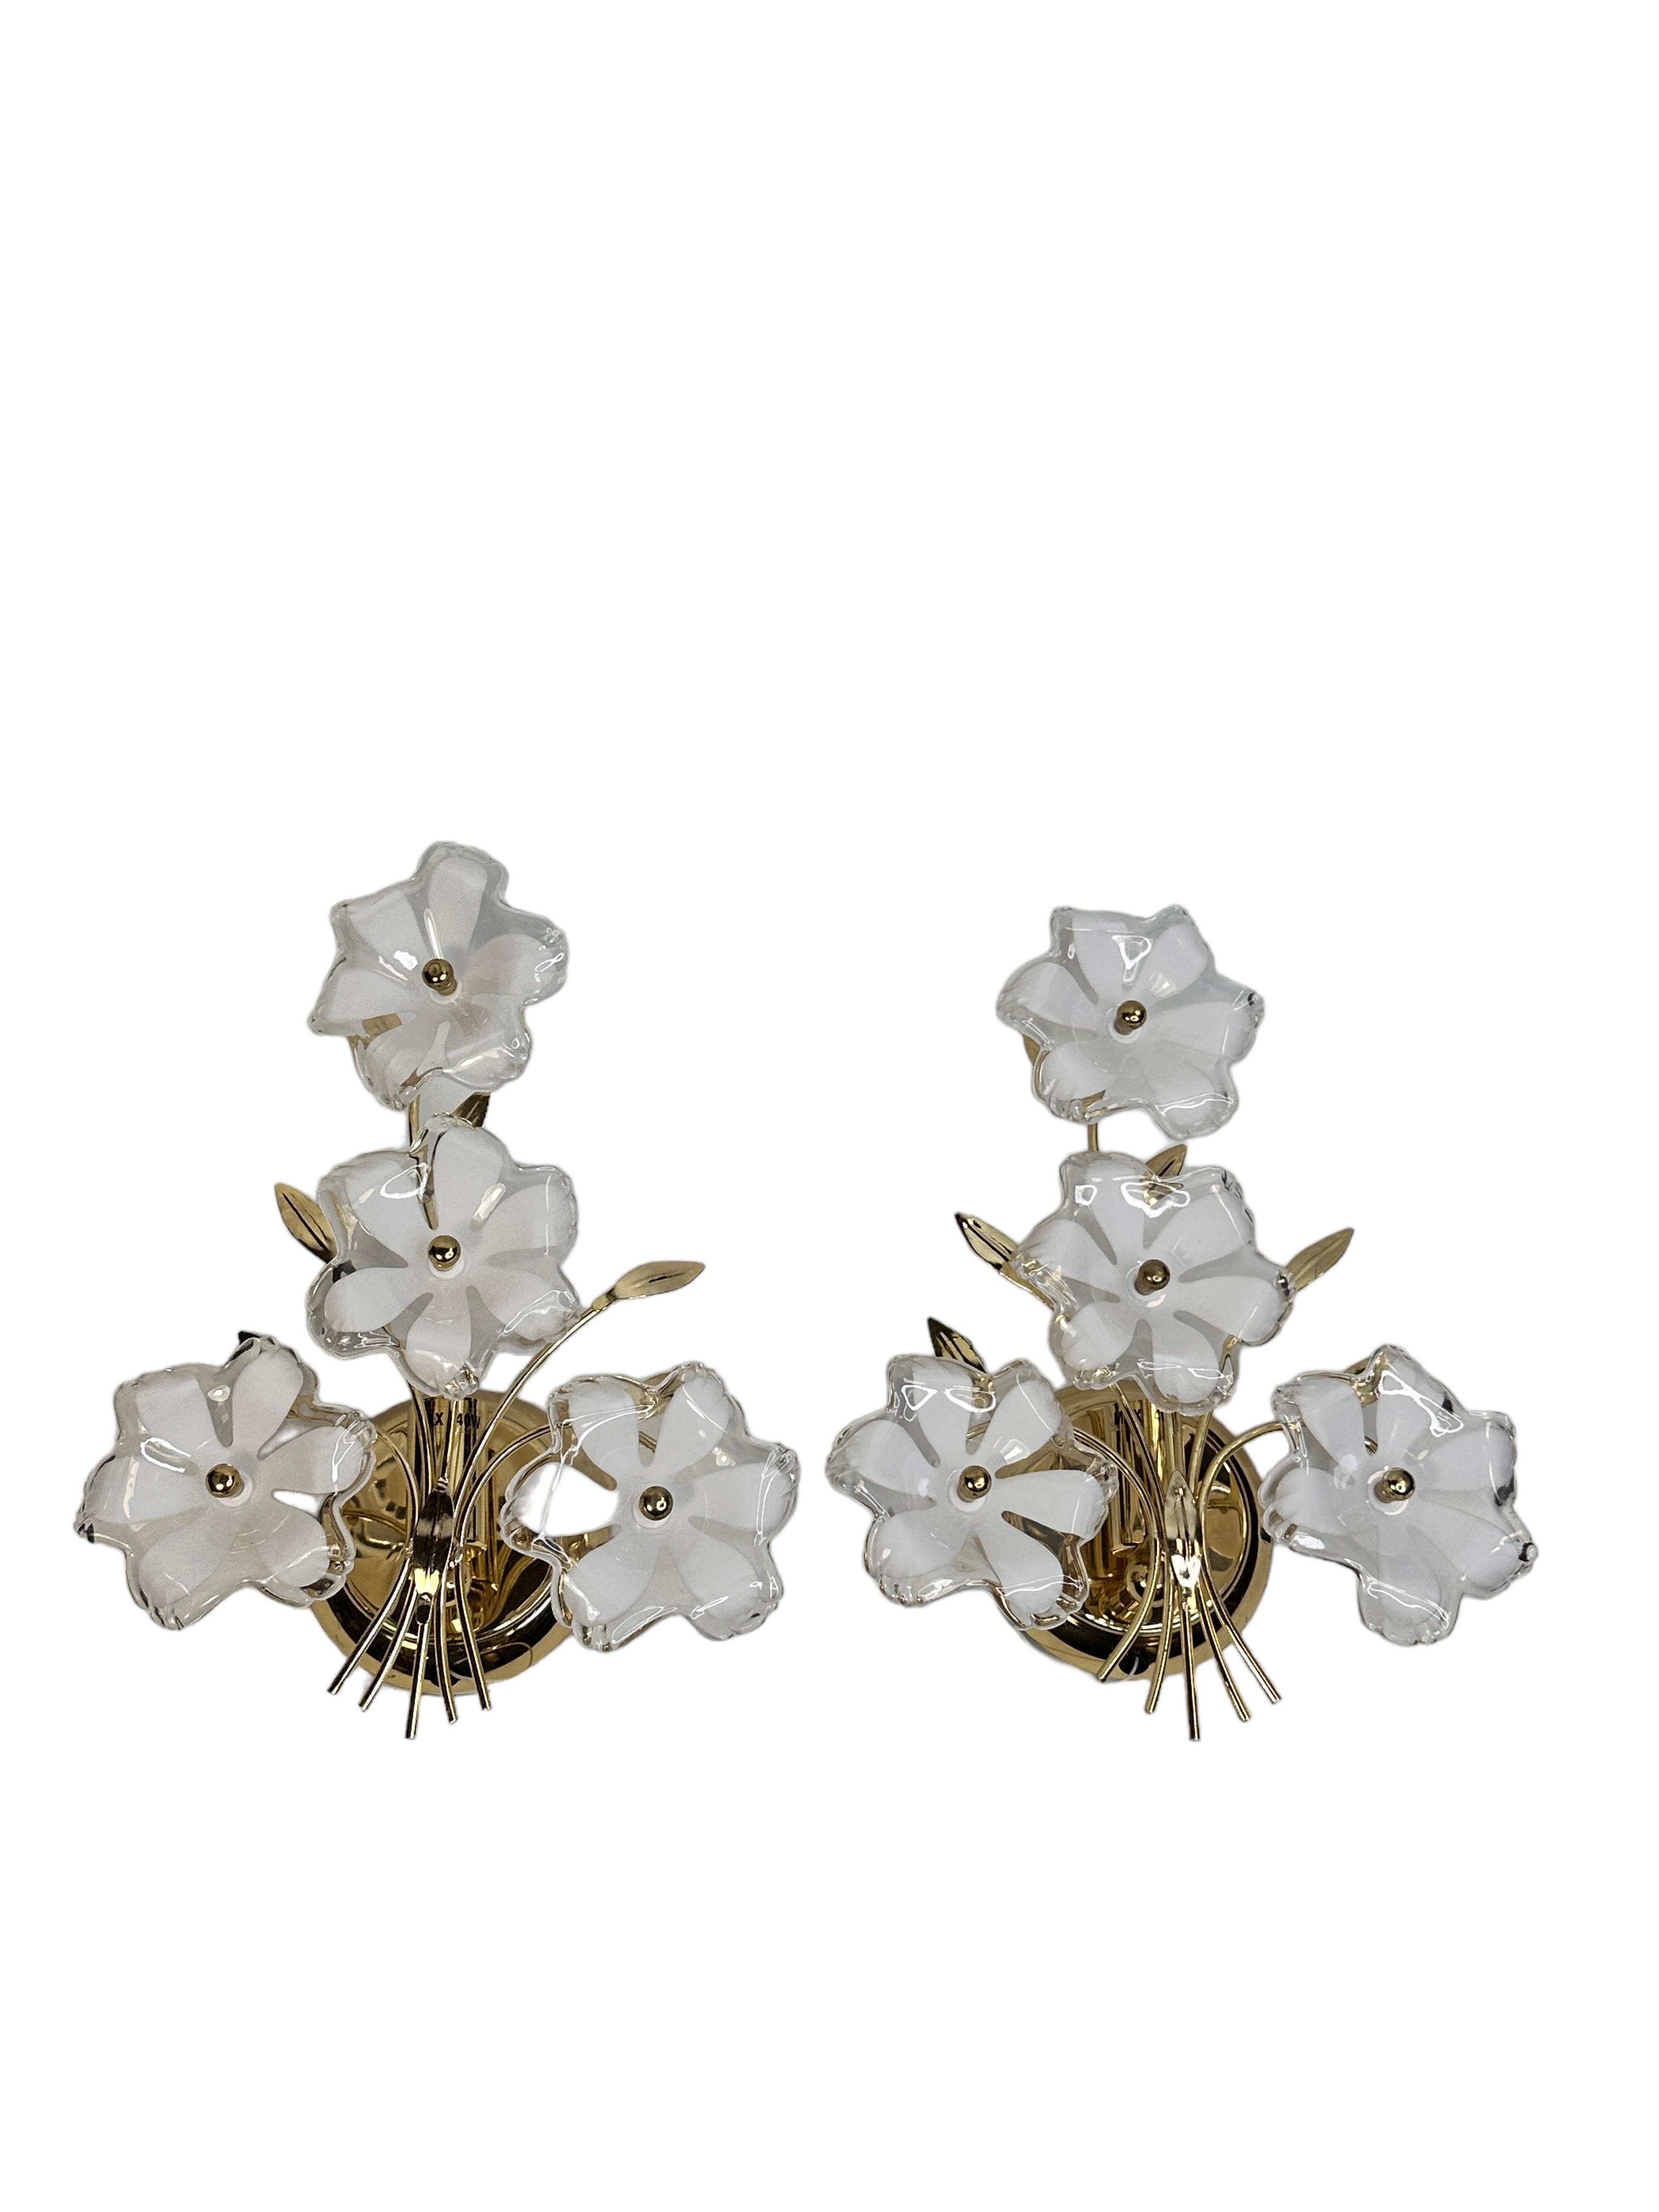 These beautiful wall sconces will make a statement in your home.
The glass flowers are handmade, so each flower is slightly different. This listing is for 2 sconces.
It can be used right away suitable for any electric system, has been rewired and